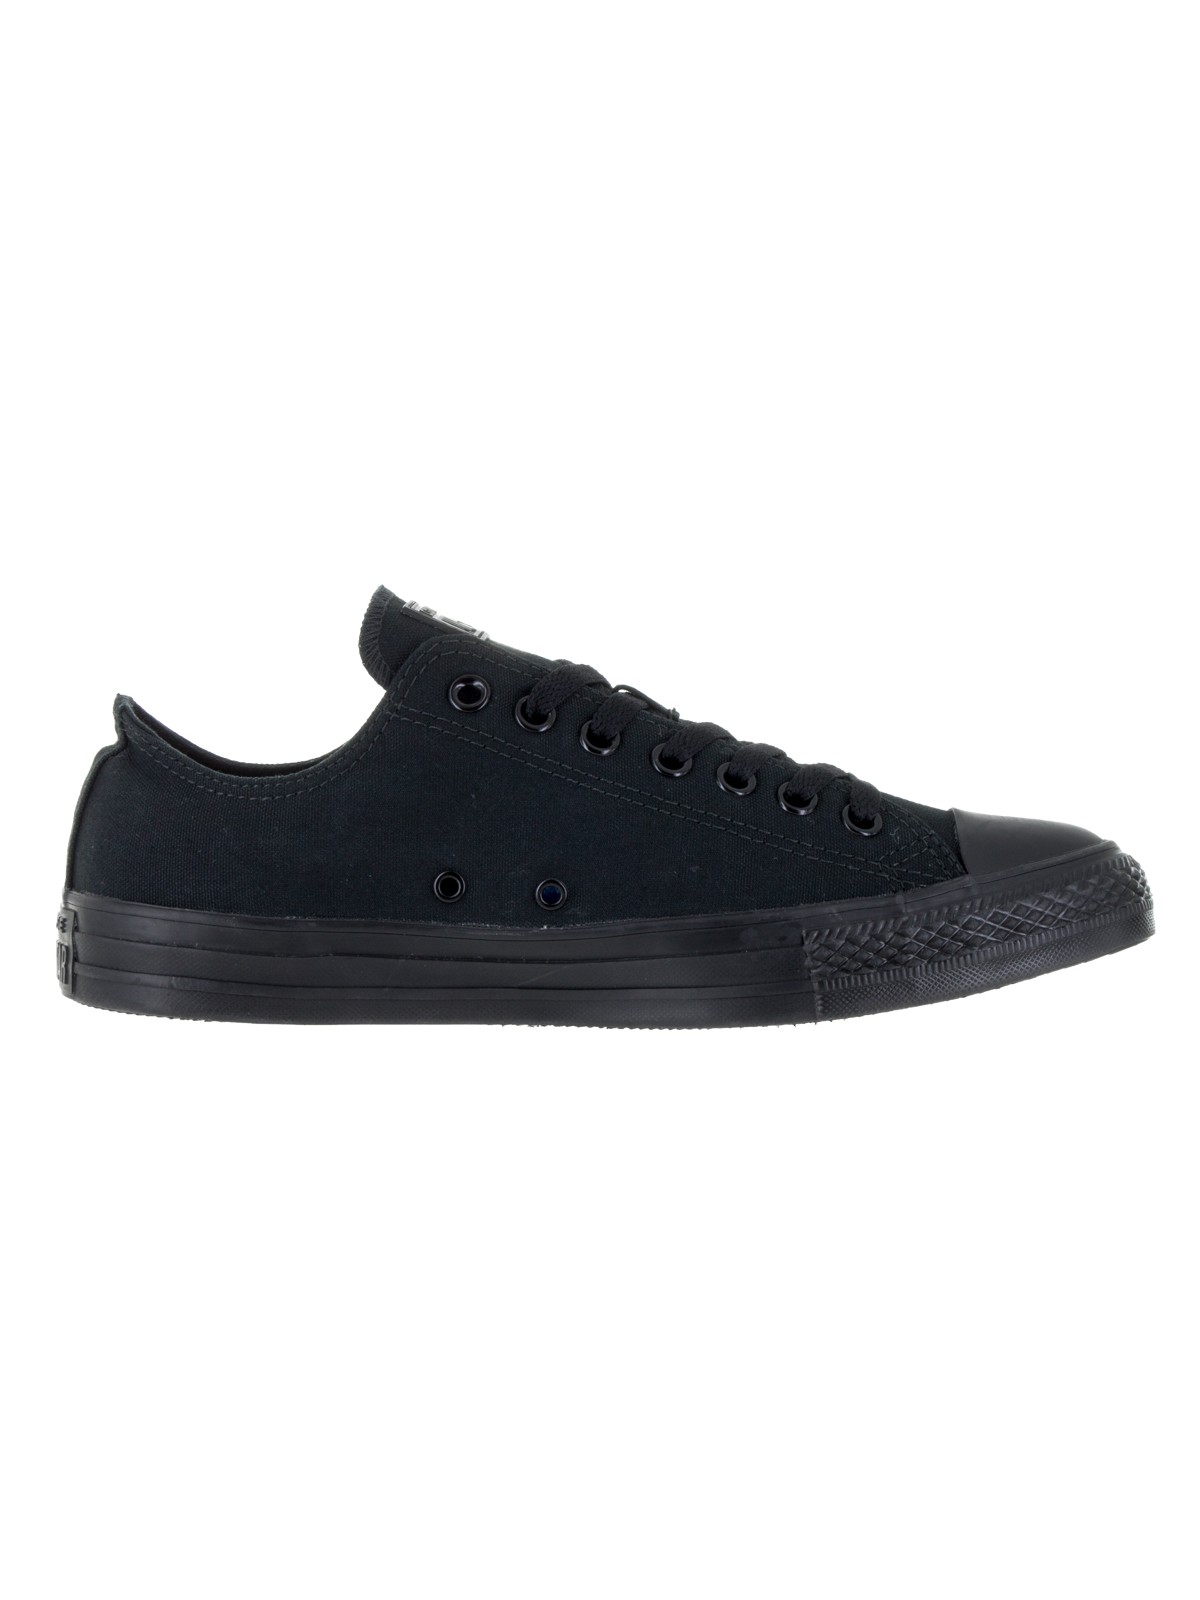 Converse Chuck Taylor All Star Low Sneaker - image 2 of 5